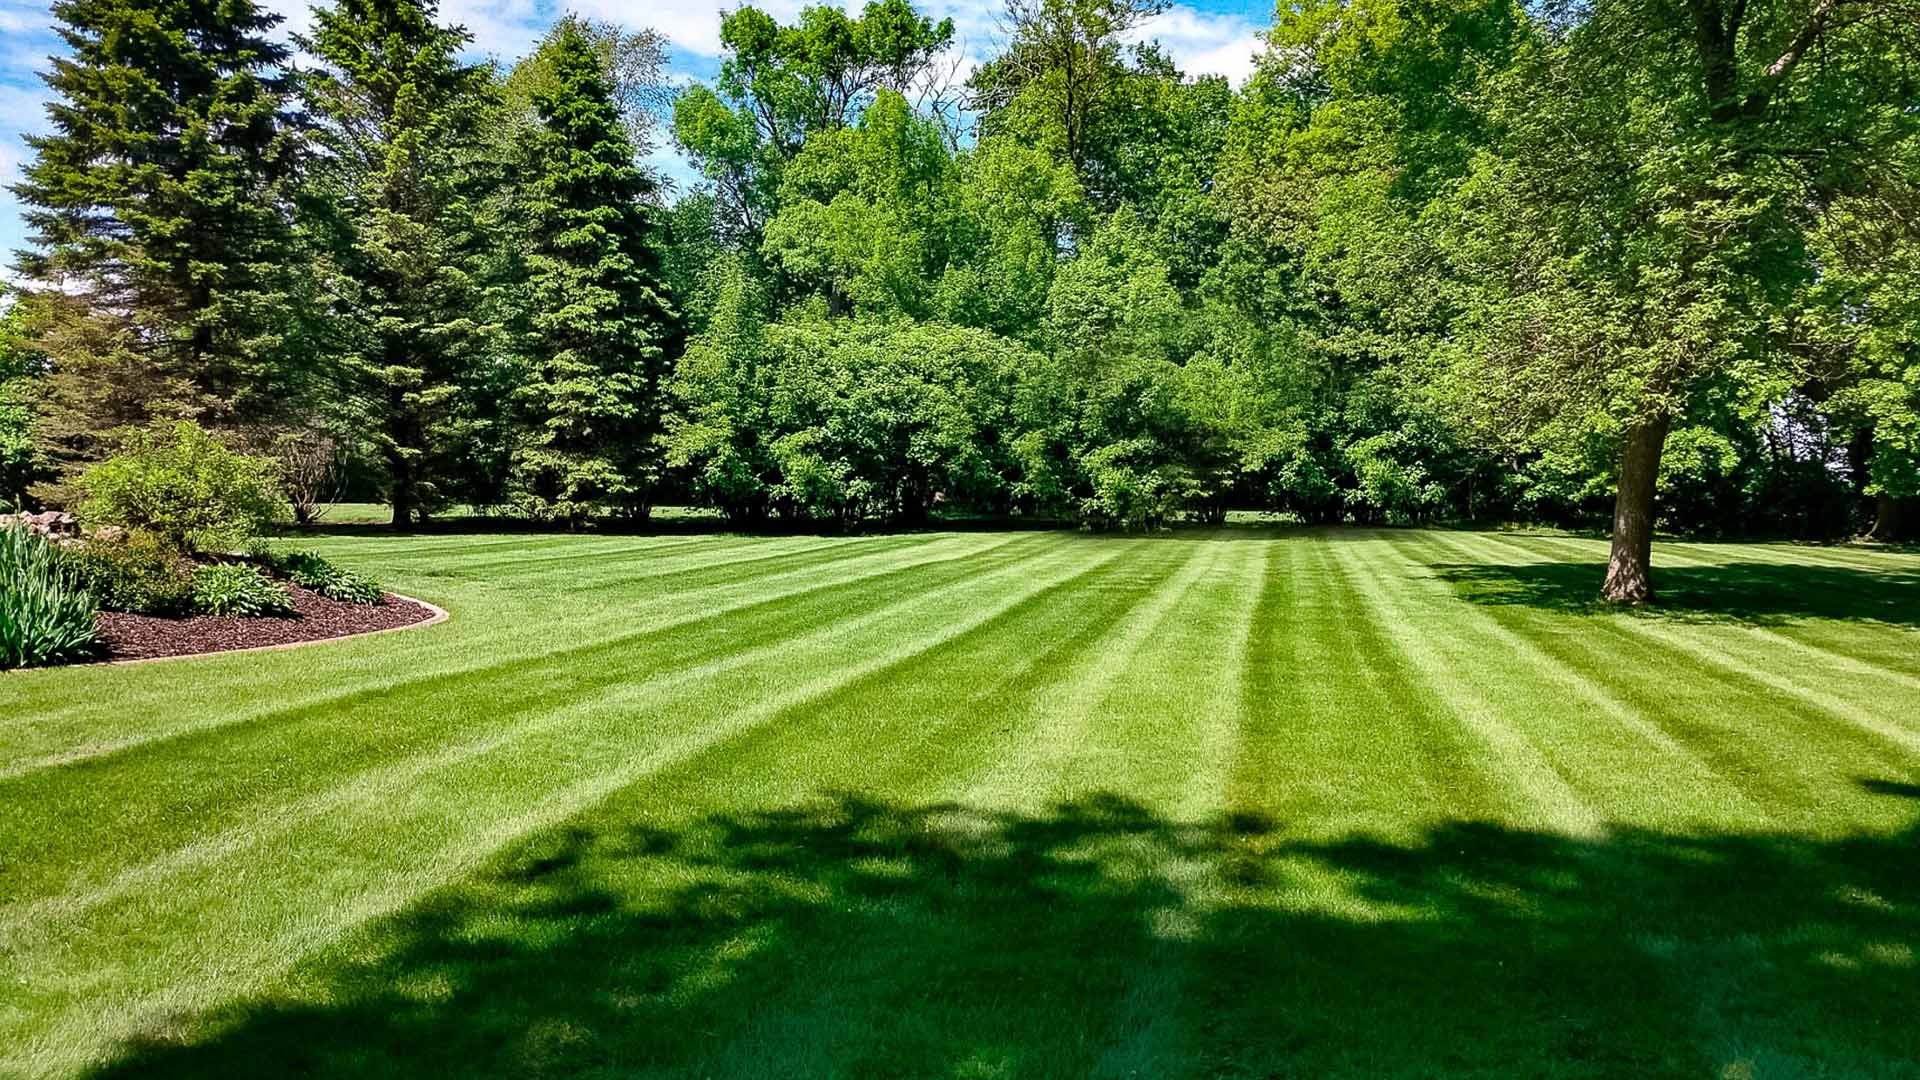 Beautiful, well-maintained yard and landscaping at a property in Mankato, MN.